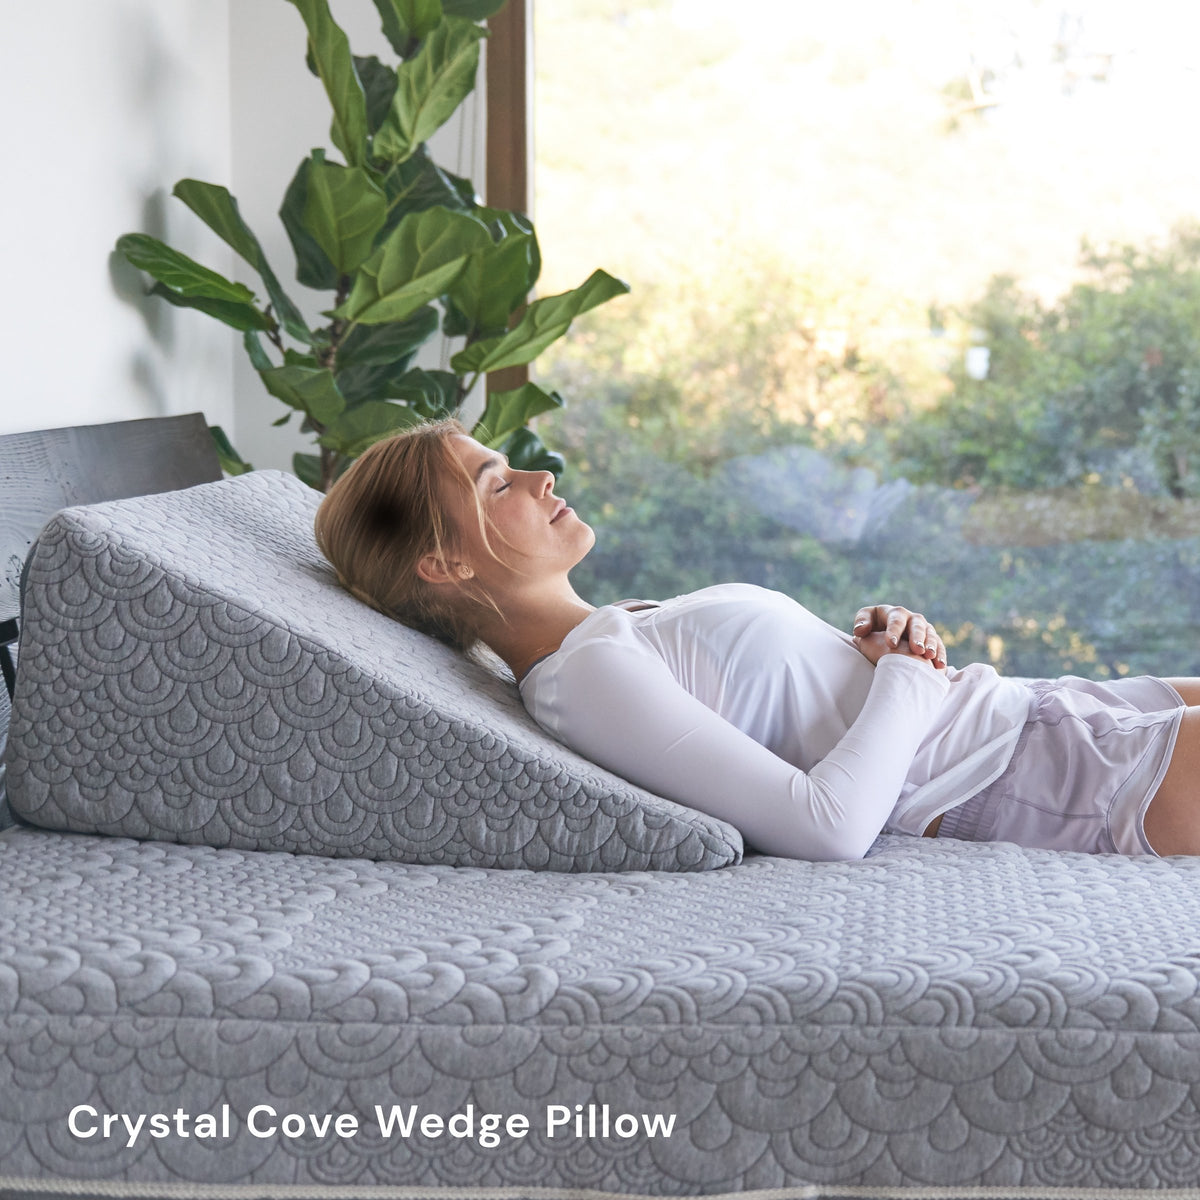 Replacement Wedge Pillow Covers